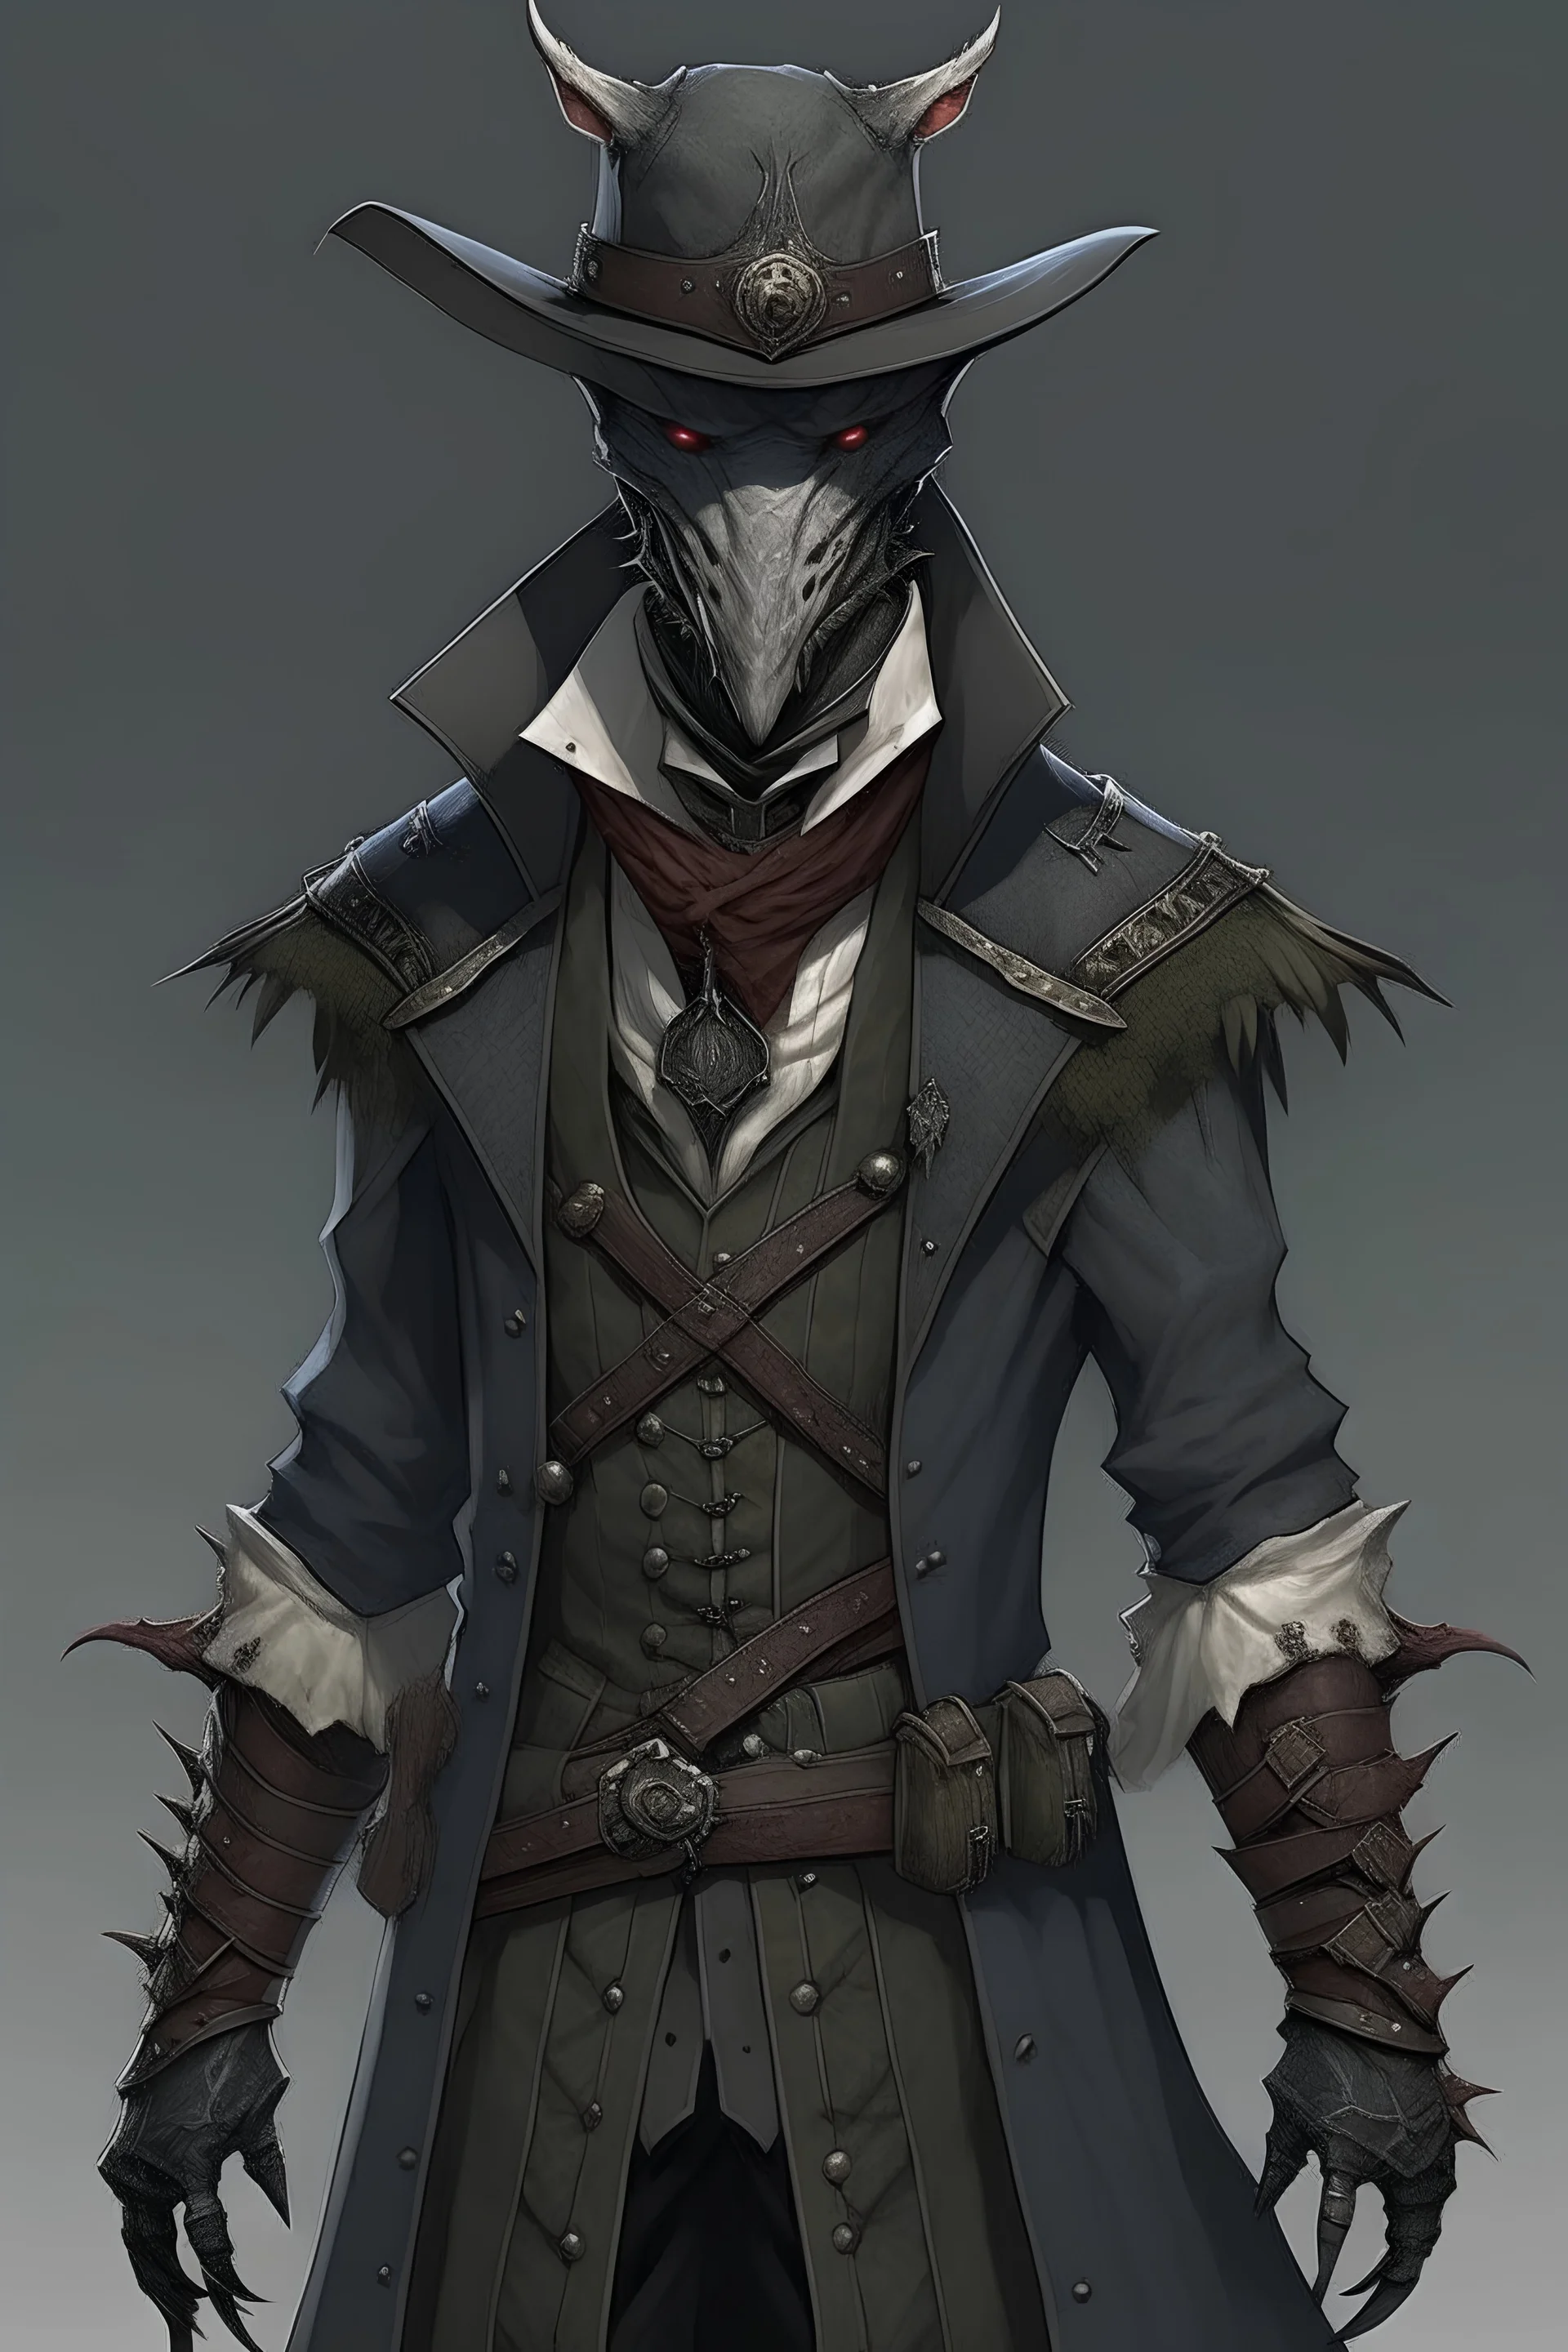 aristocratic hunter, bloodborne style, front view